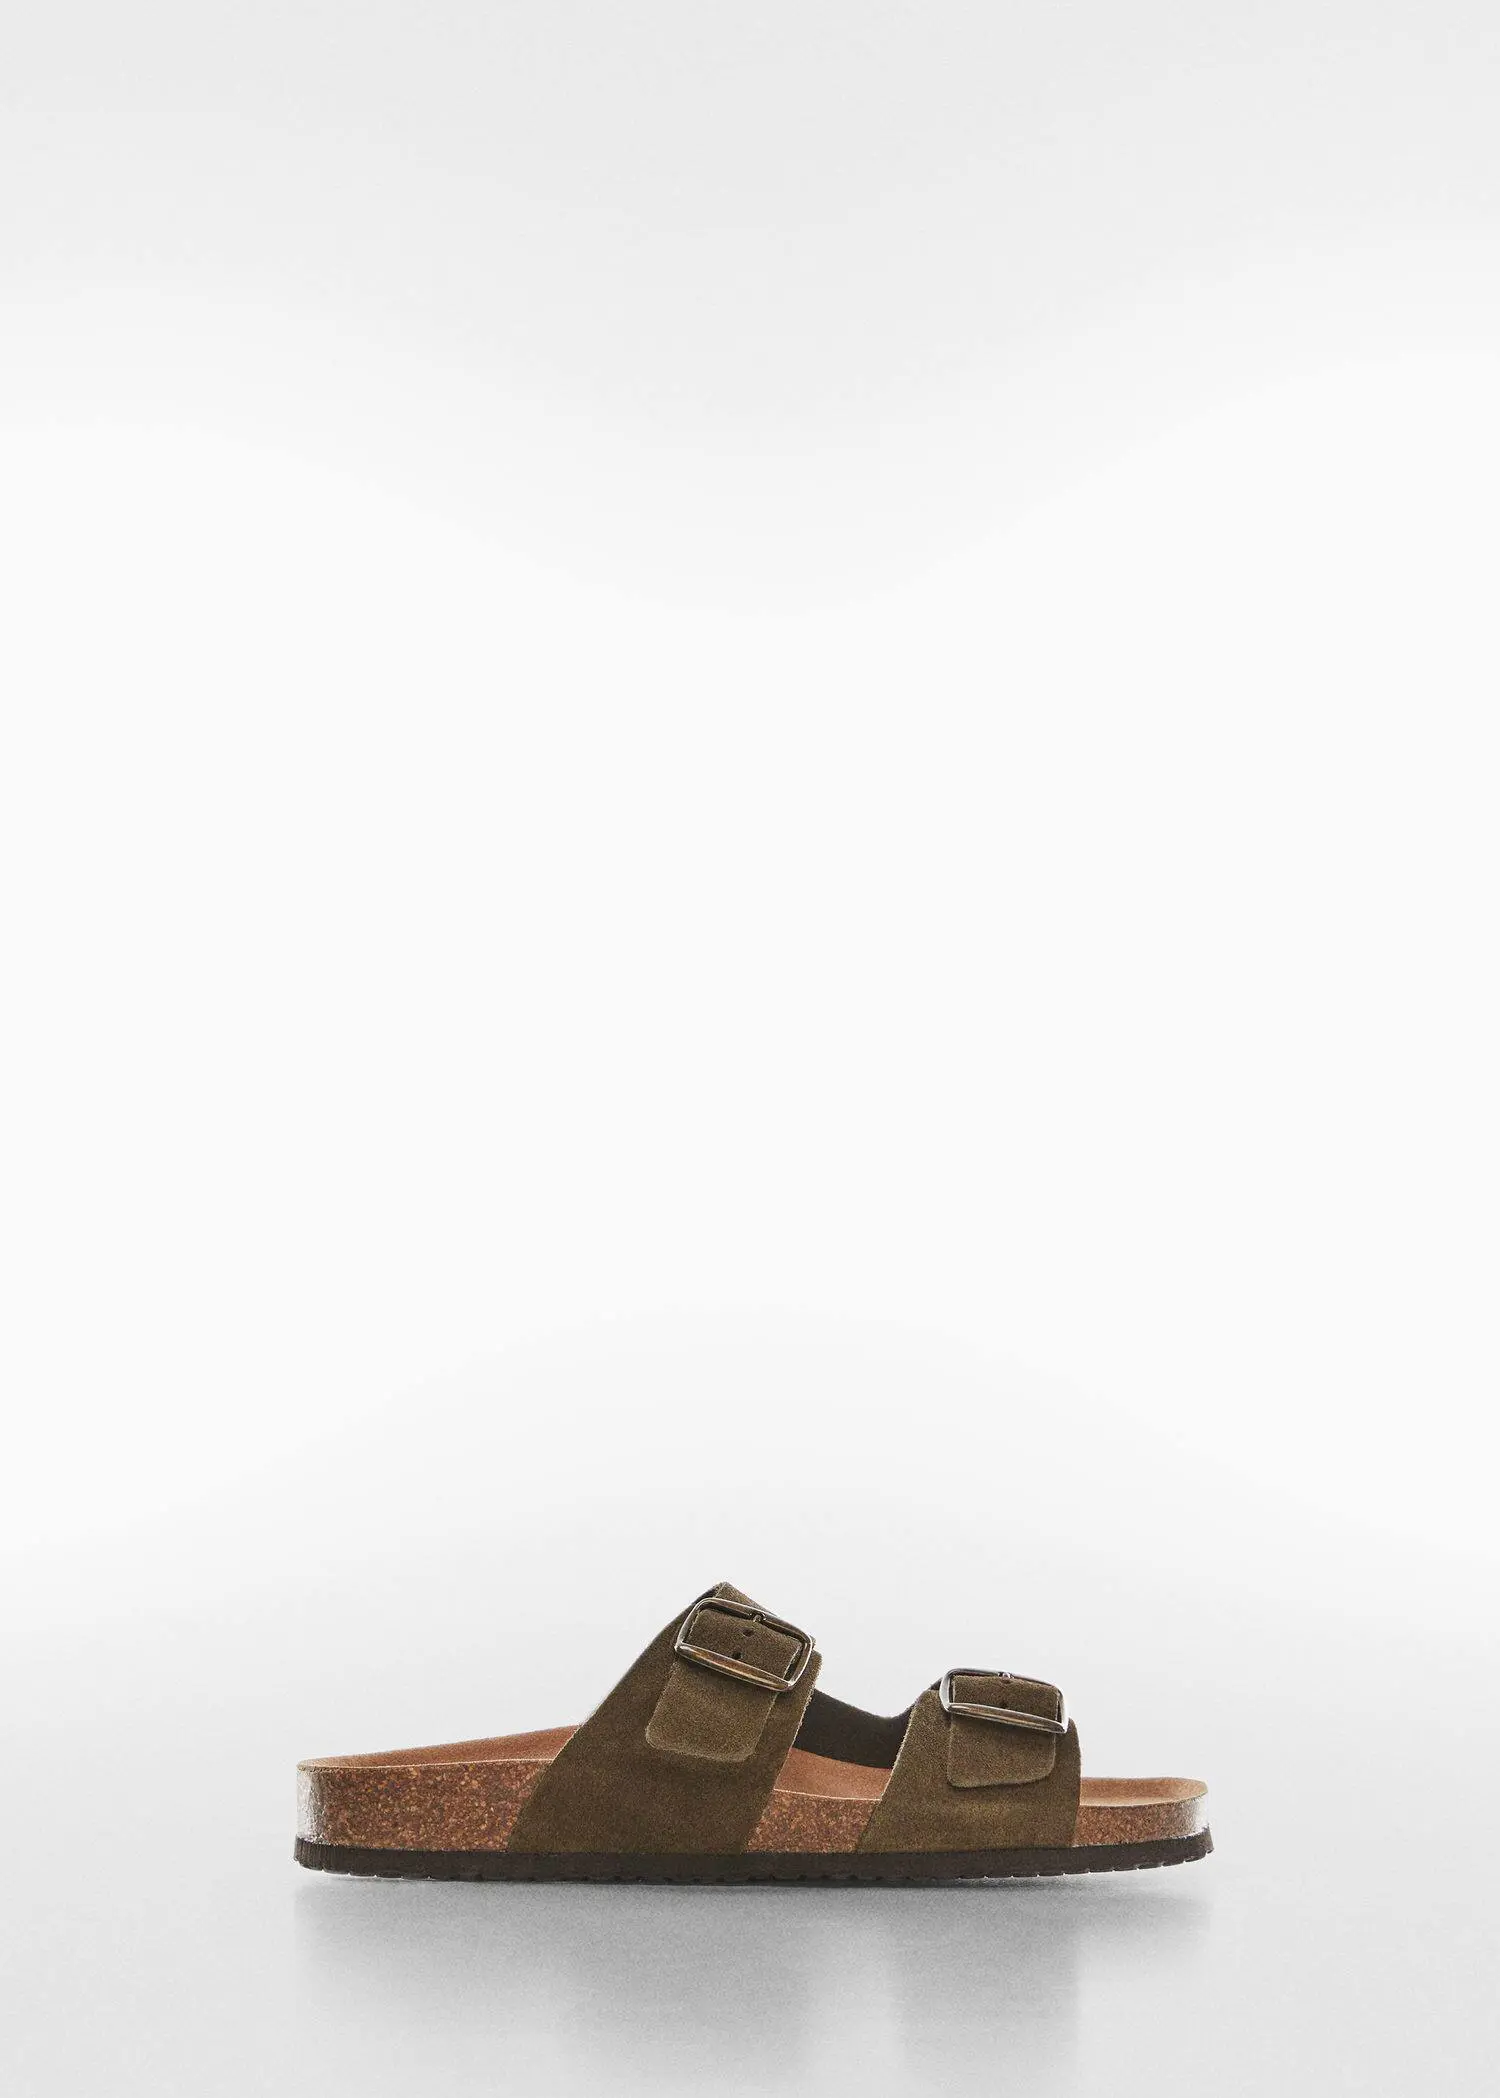 Mango Split leather sandals with buckle. a pair of brown sandals sitting on top of each other. 